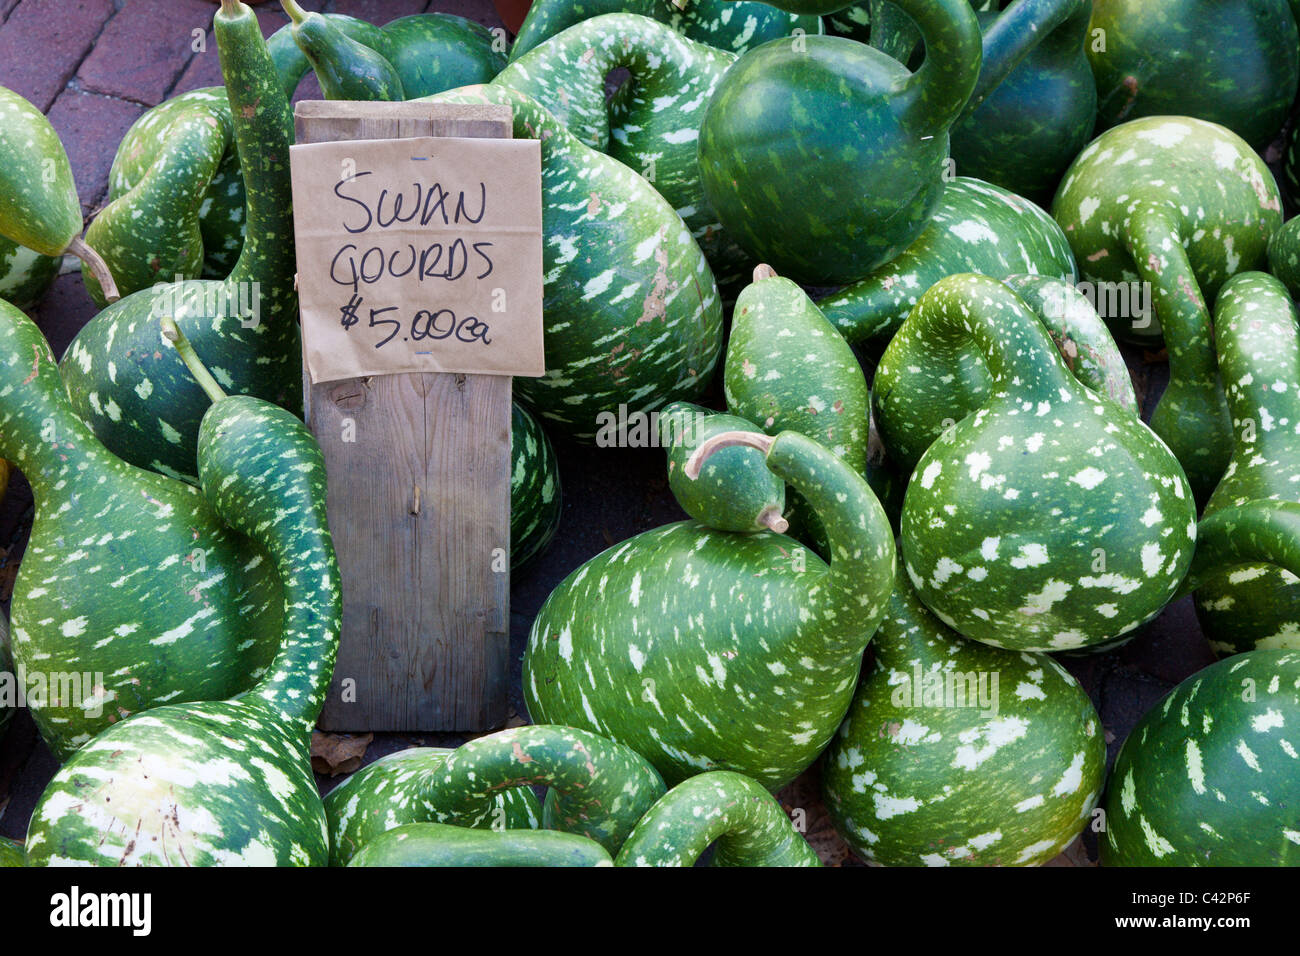 Swan Gourds for sale at $5 each Stock Photo